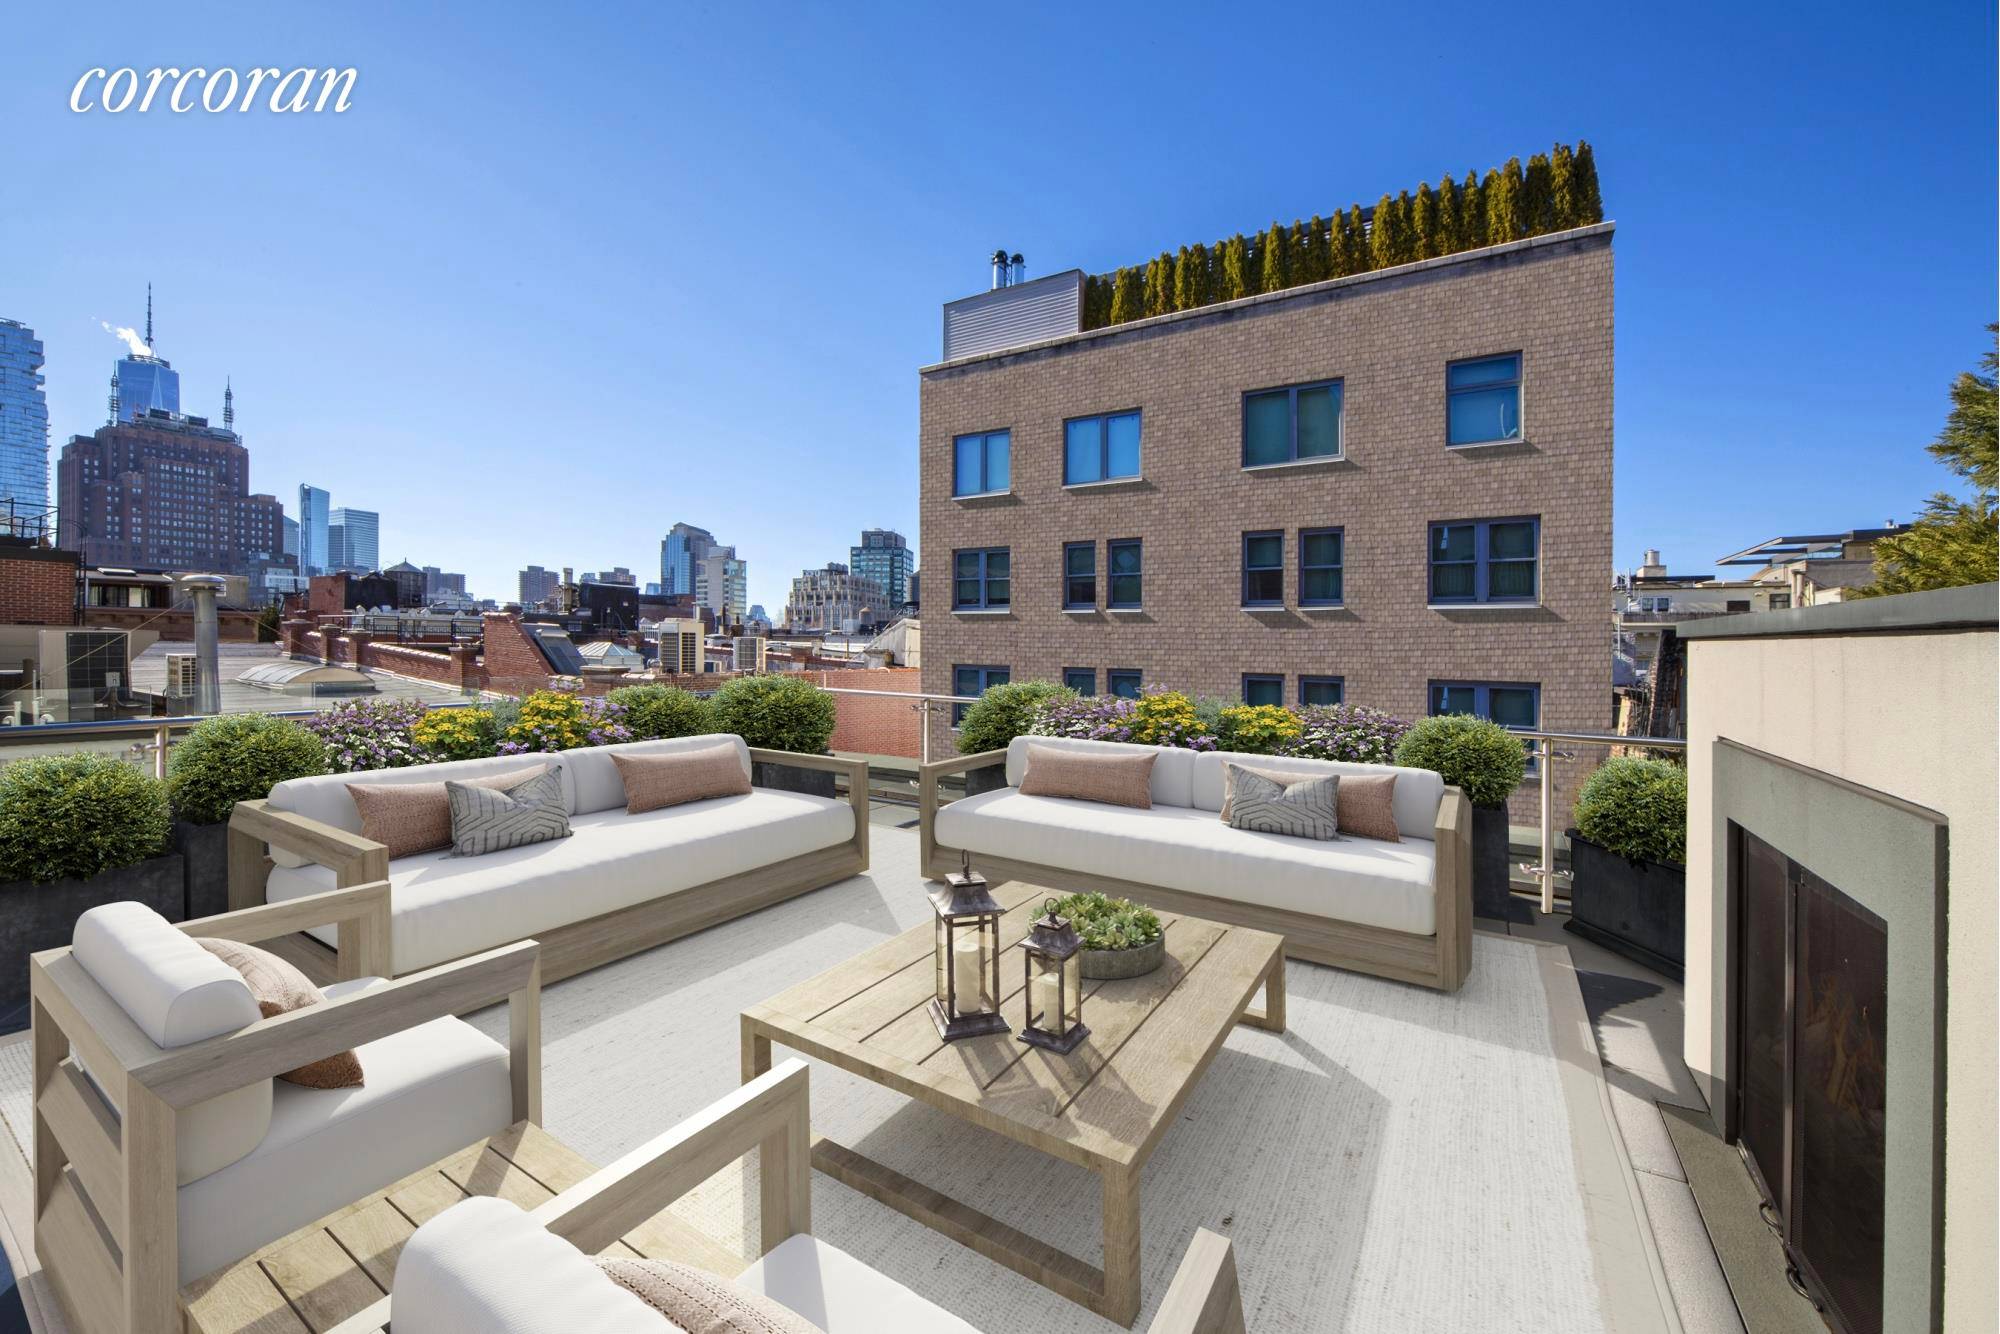 This incredible SoHo triplex penthouse defines modern minimalism in a historic cast iron loft building, featuring three bedrooms and three outstanding terraces for an ideal indoor outdoor lifestyle in the ...